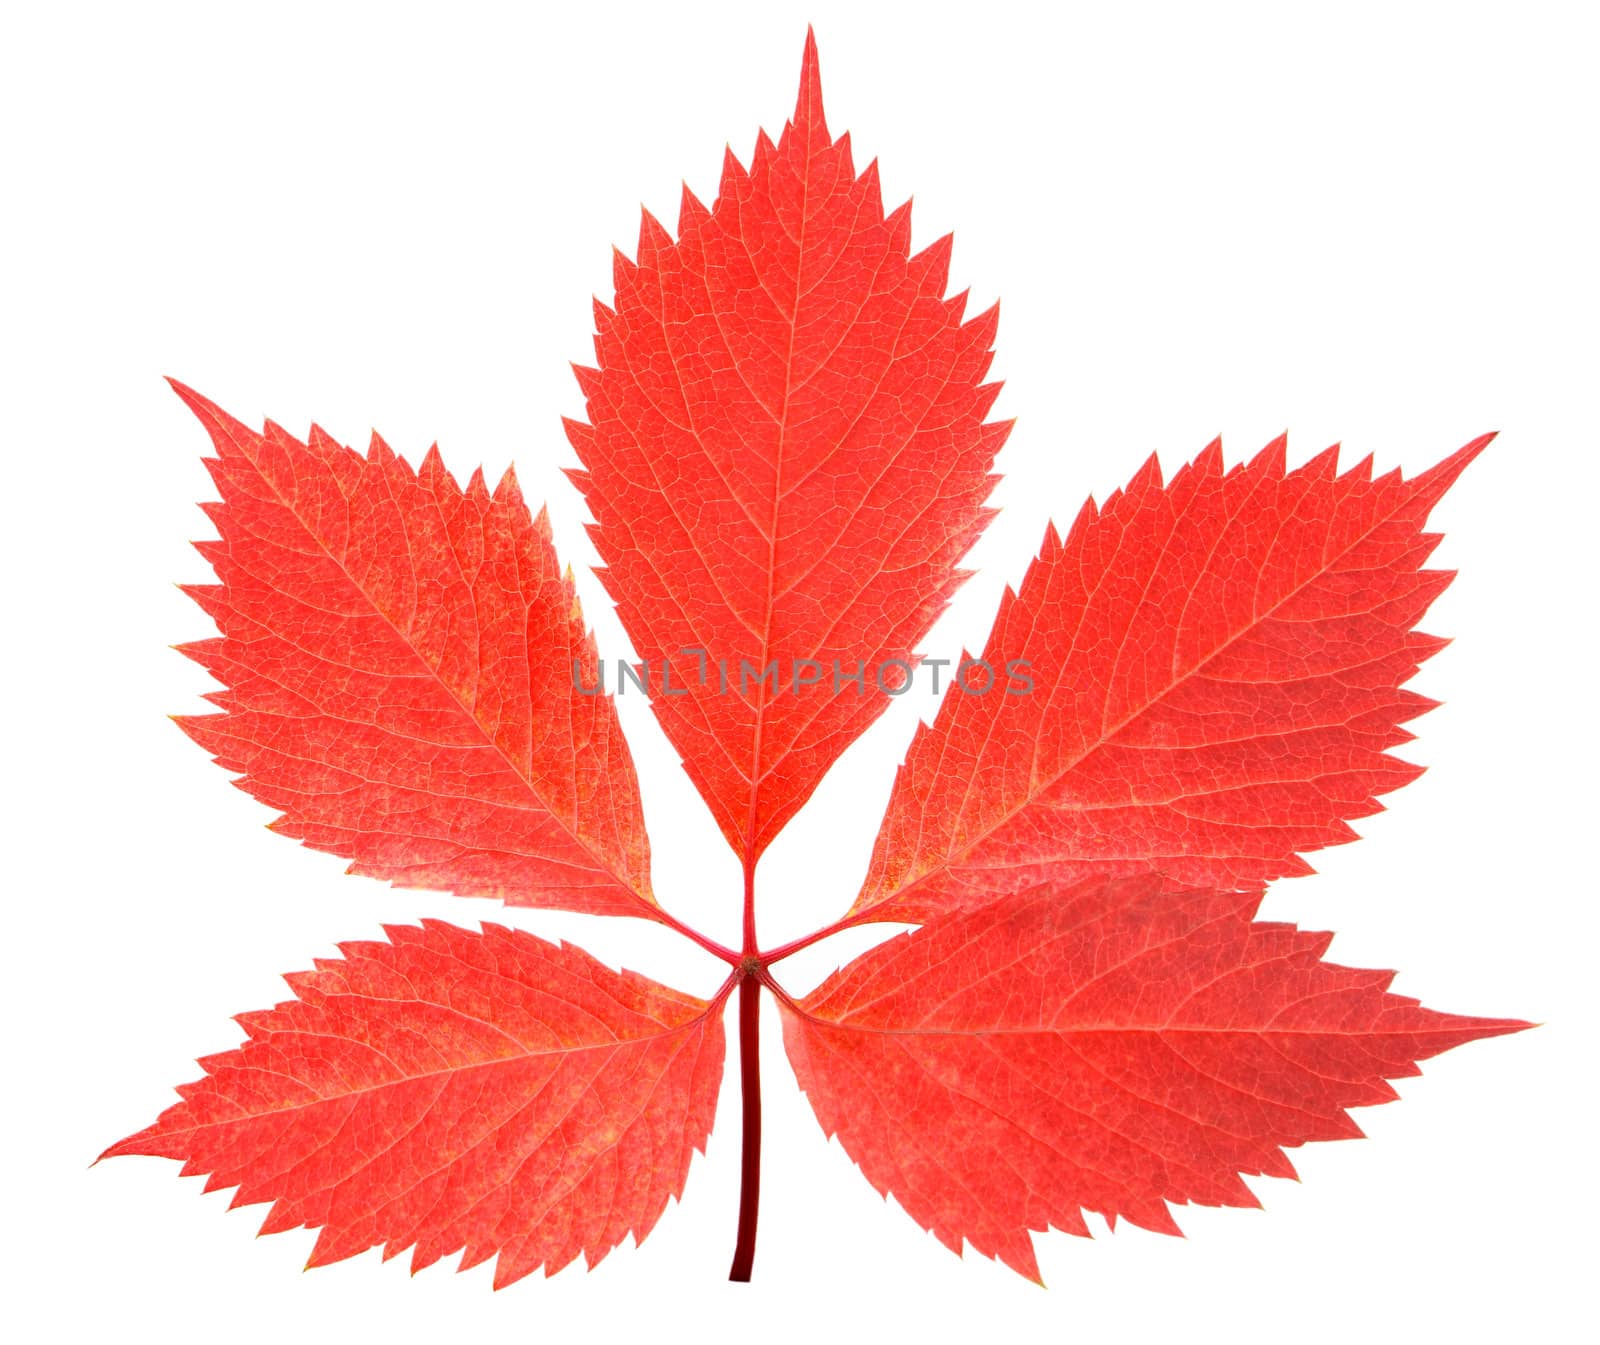 red leaf isolated over a white background by andrew_mayovskyy